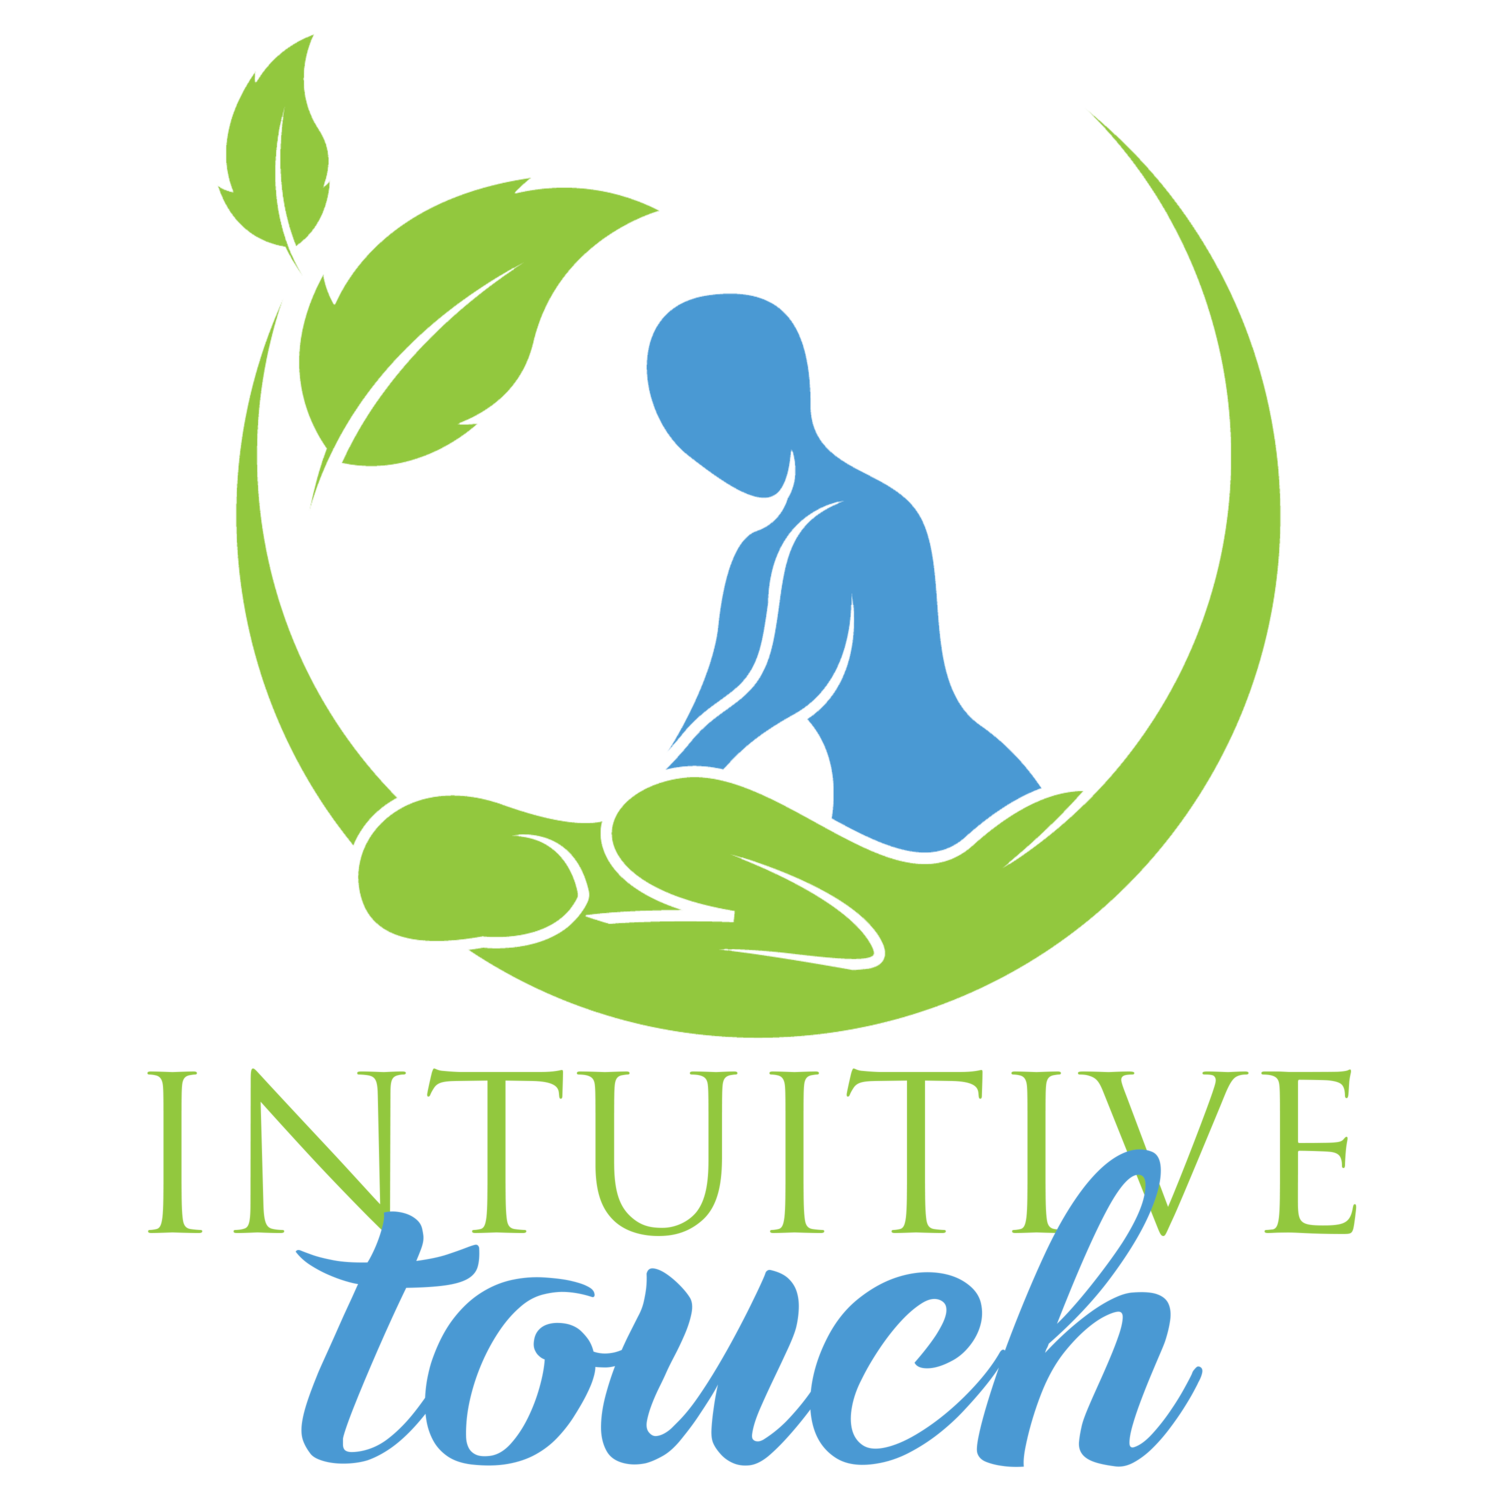 Intuitive Touch